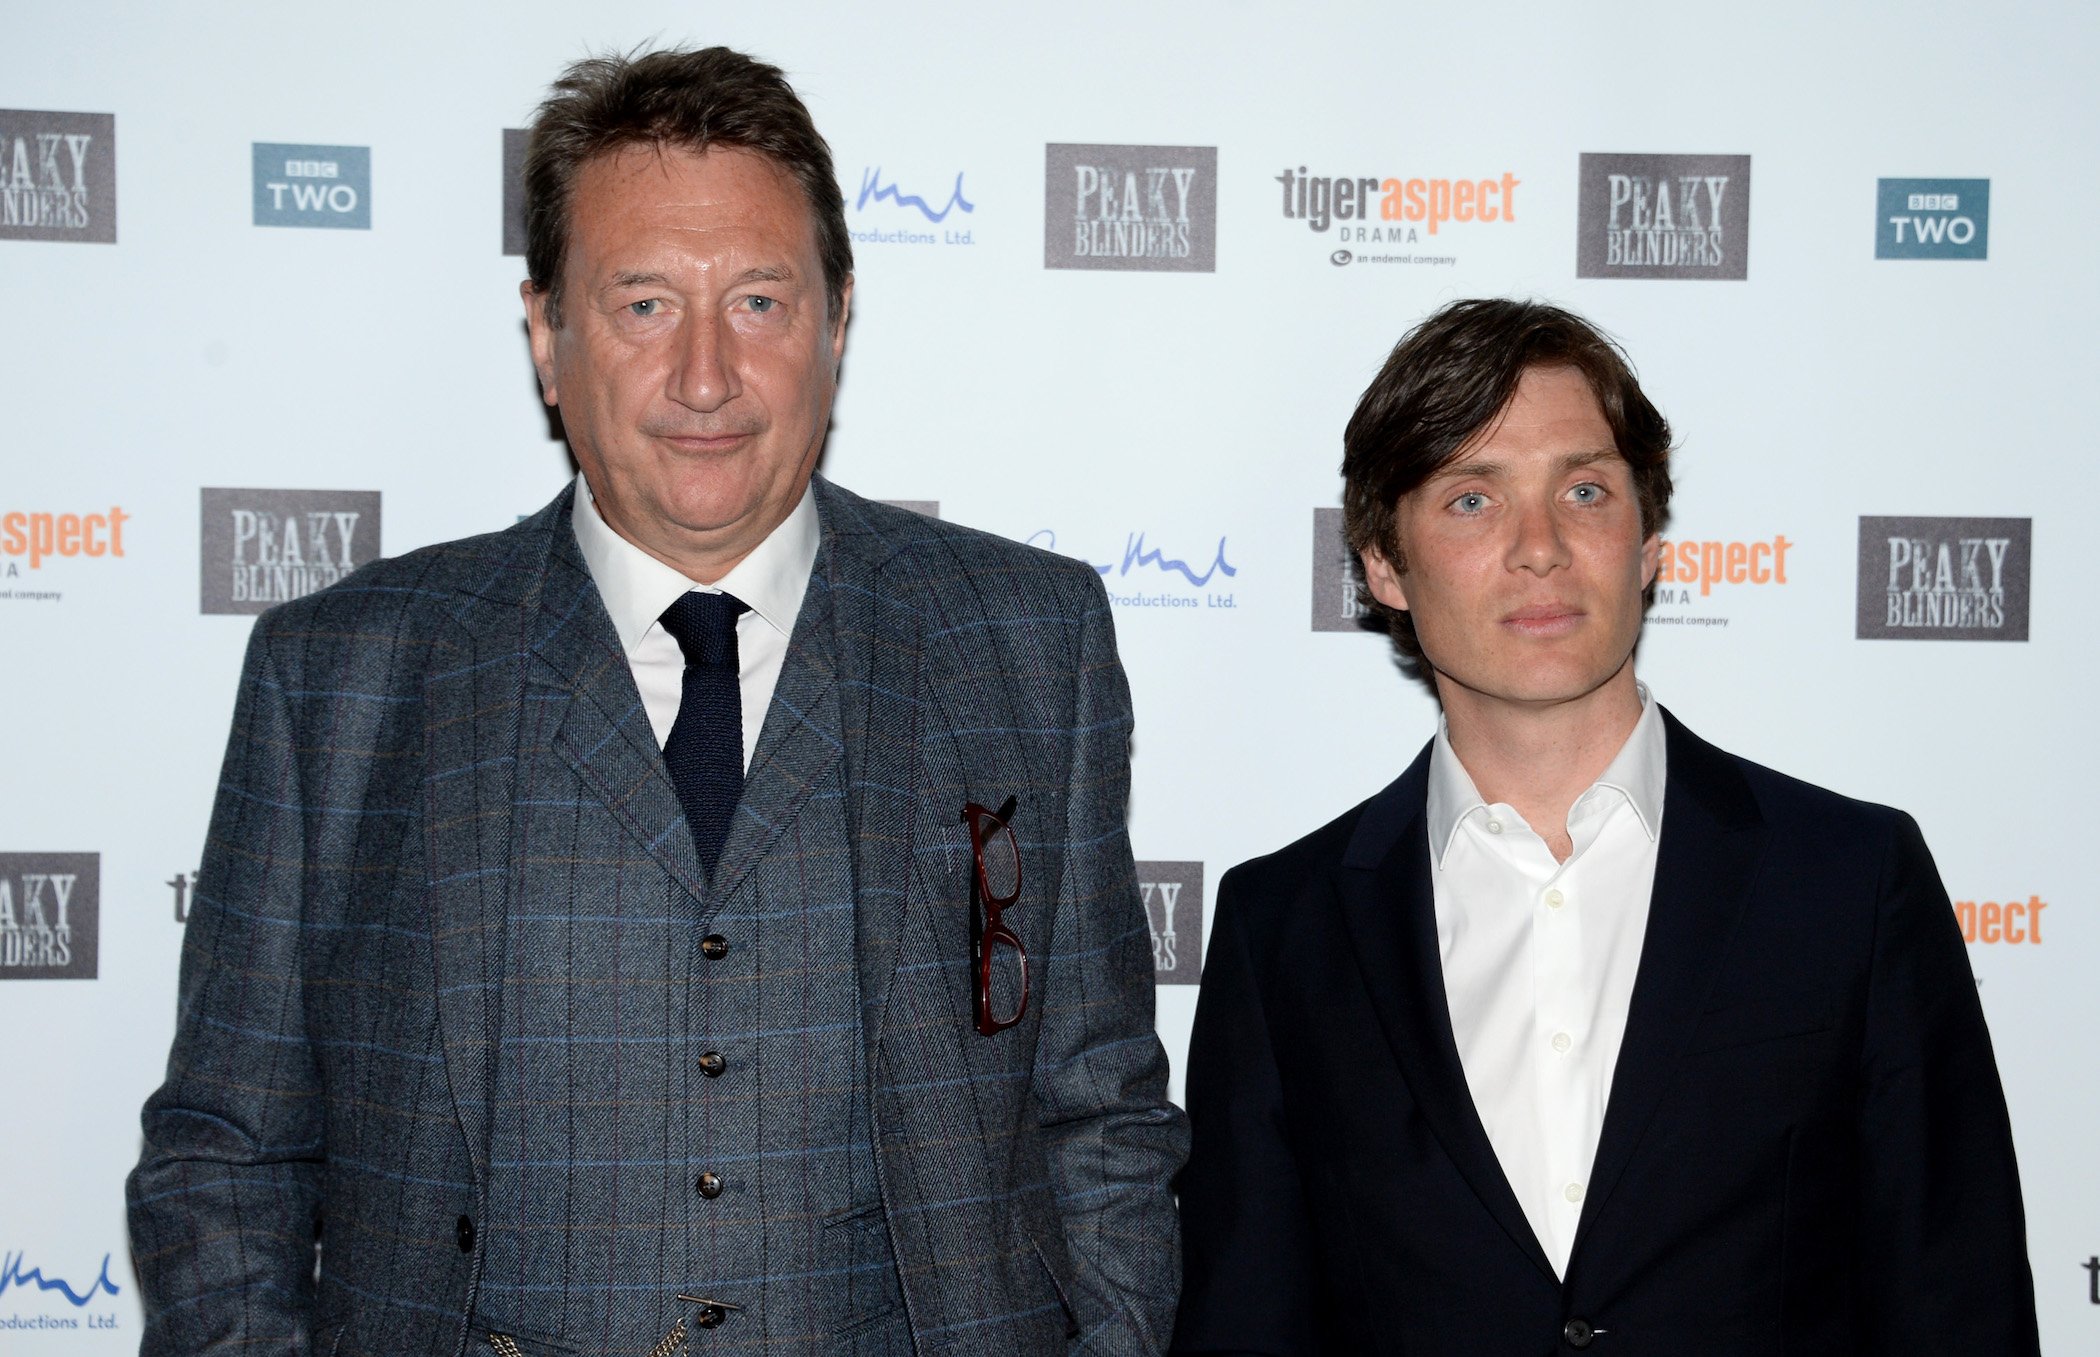 Steven Knight and Cillian Murphy from 'Peaky Blinders' Season 6 stand side-by-side at a premiere